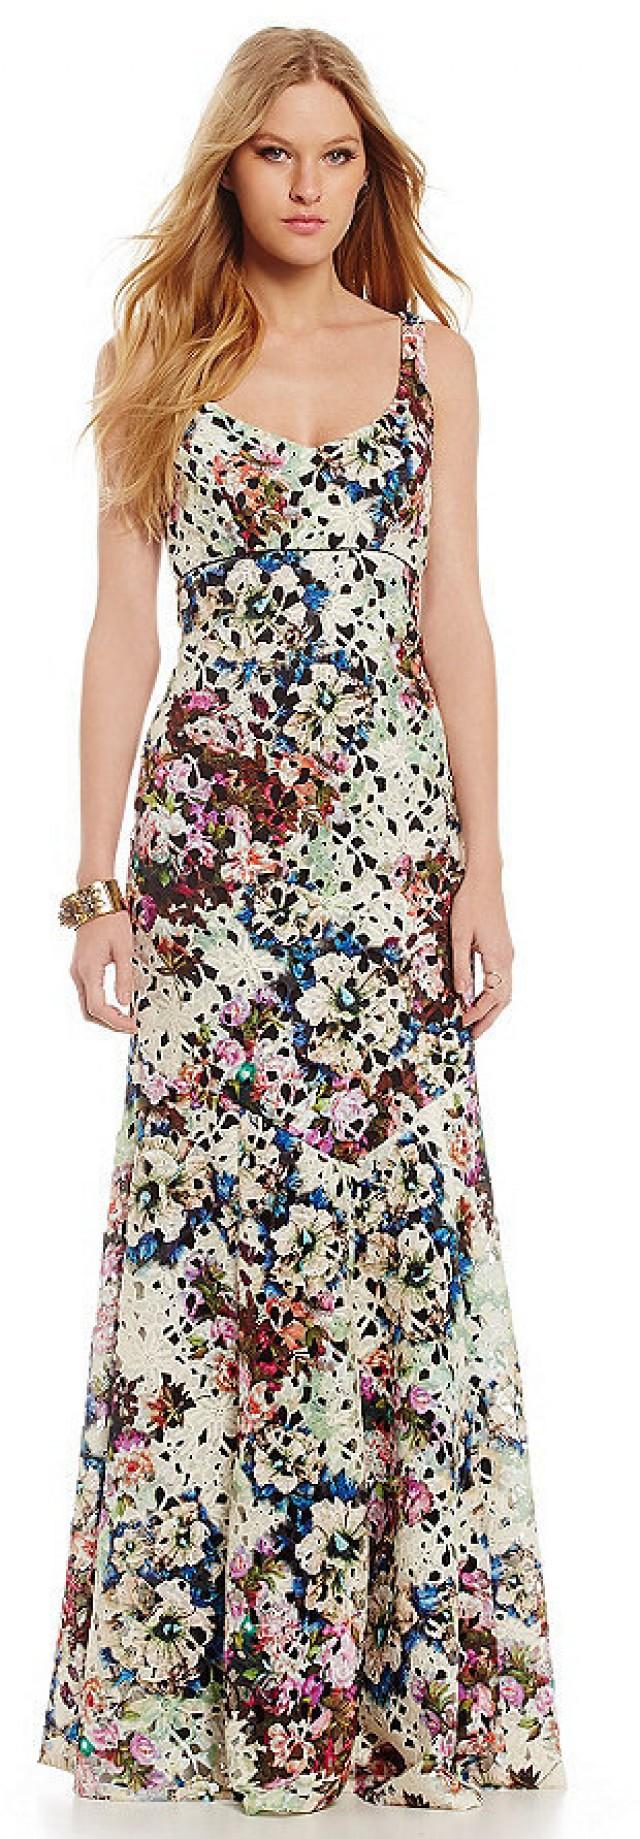 Nicole Miller Collection Venice Floral-Printed Lace Fit-and-Flare Gown ...